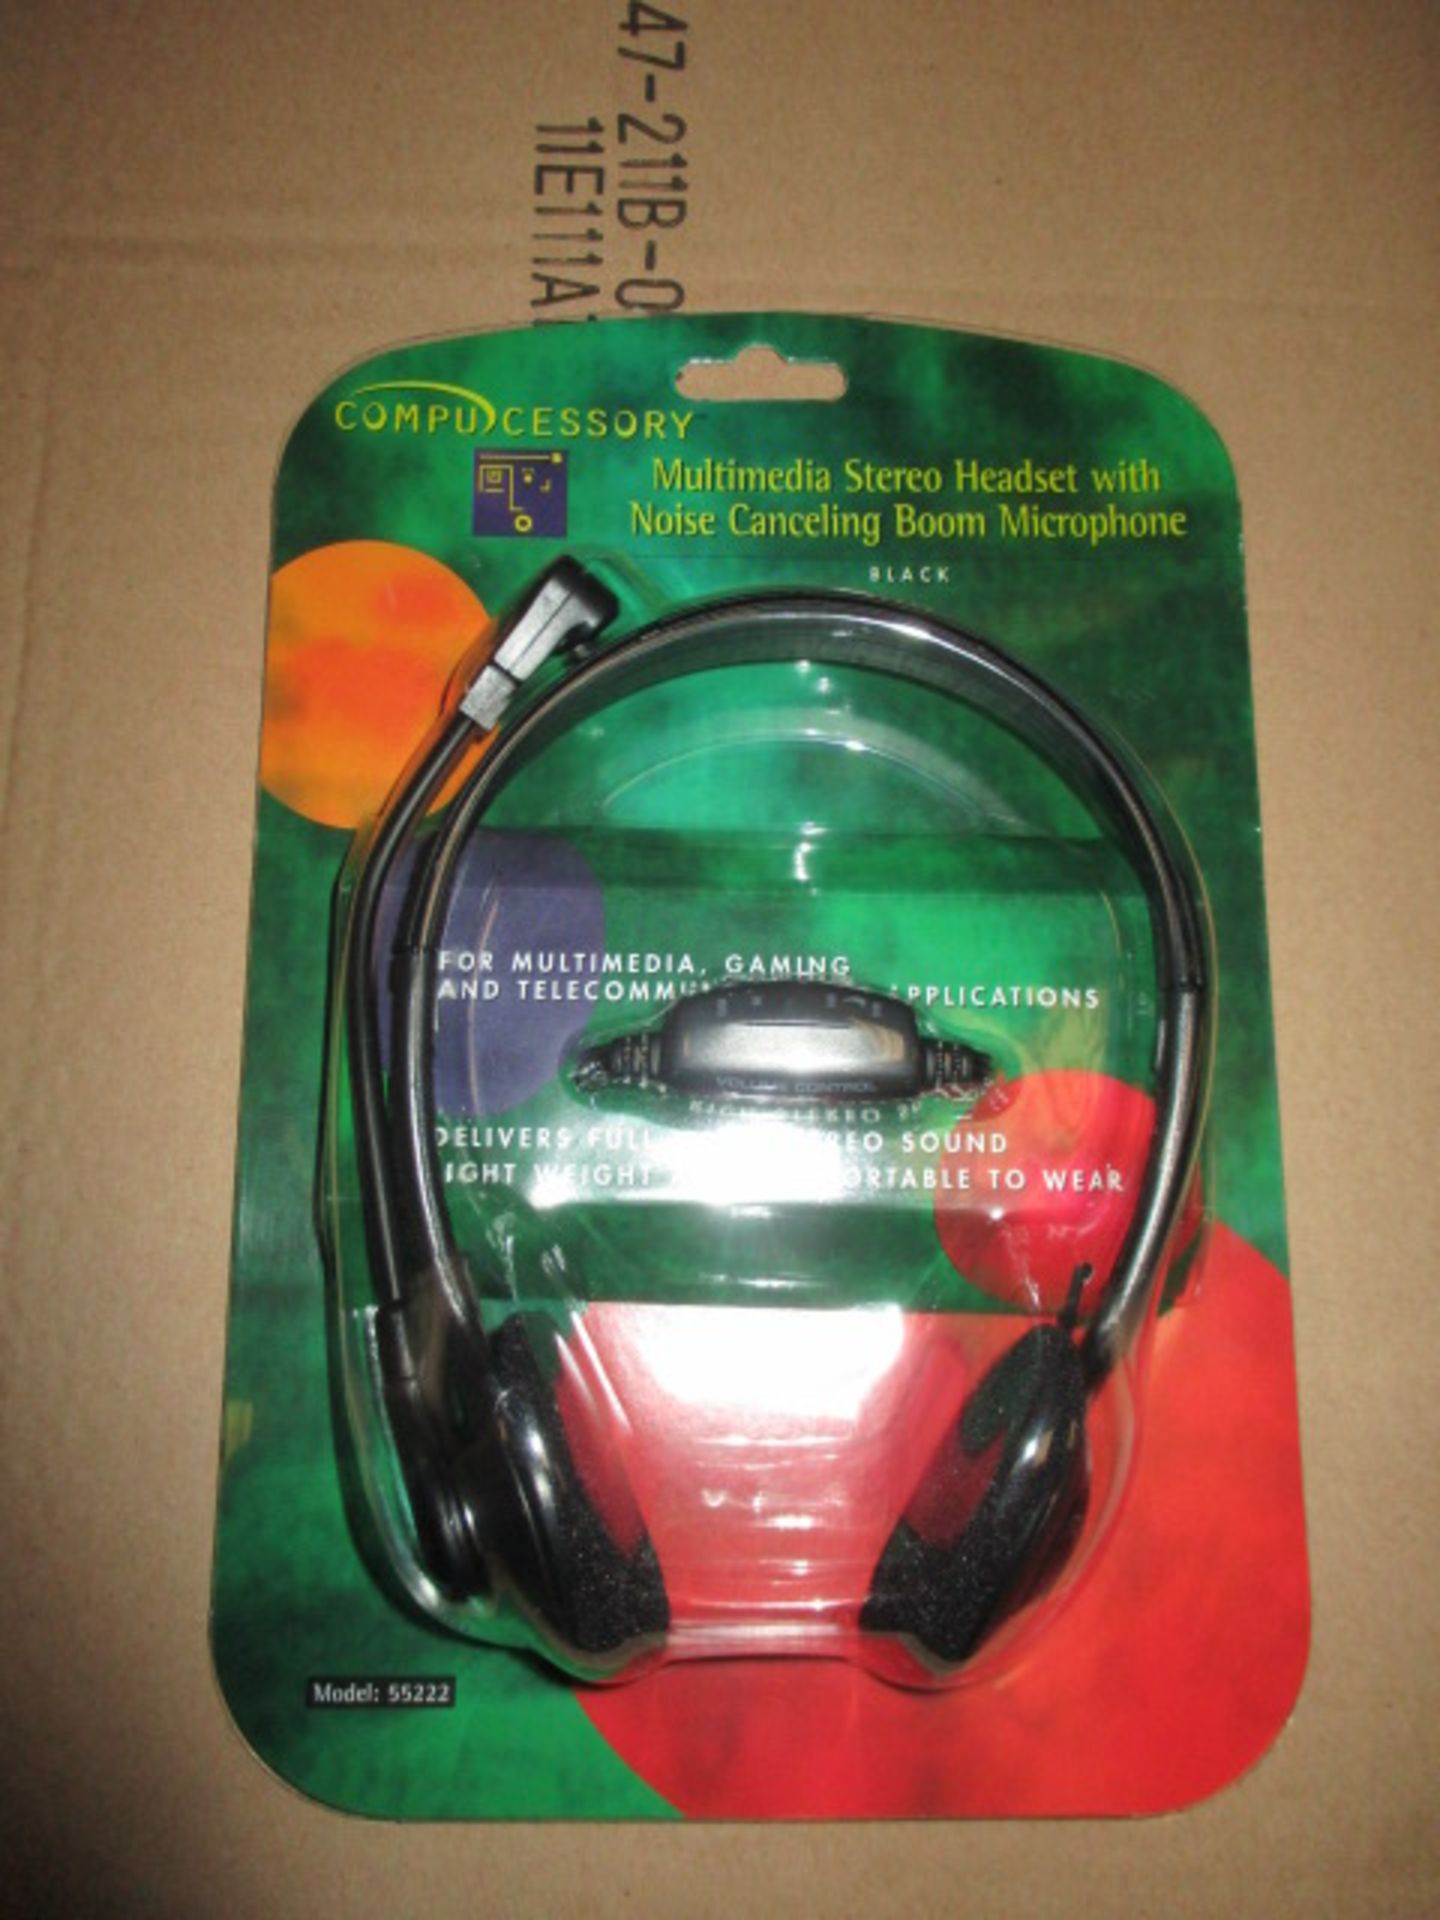 10 x Compucessory Multimedia Headsets - New and Boxed, RRP £12.90 Each